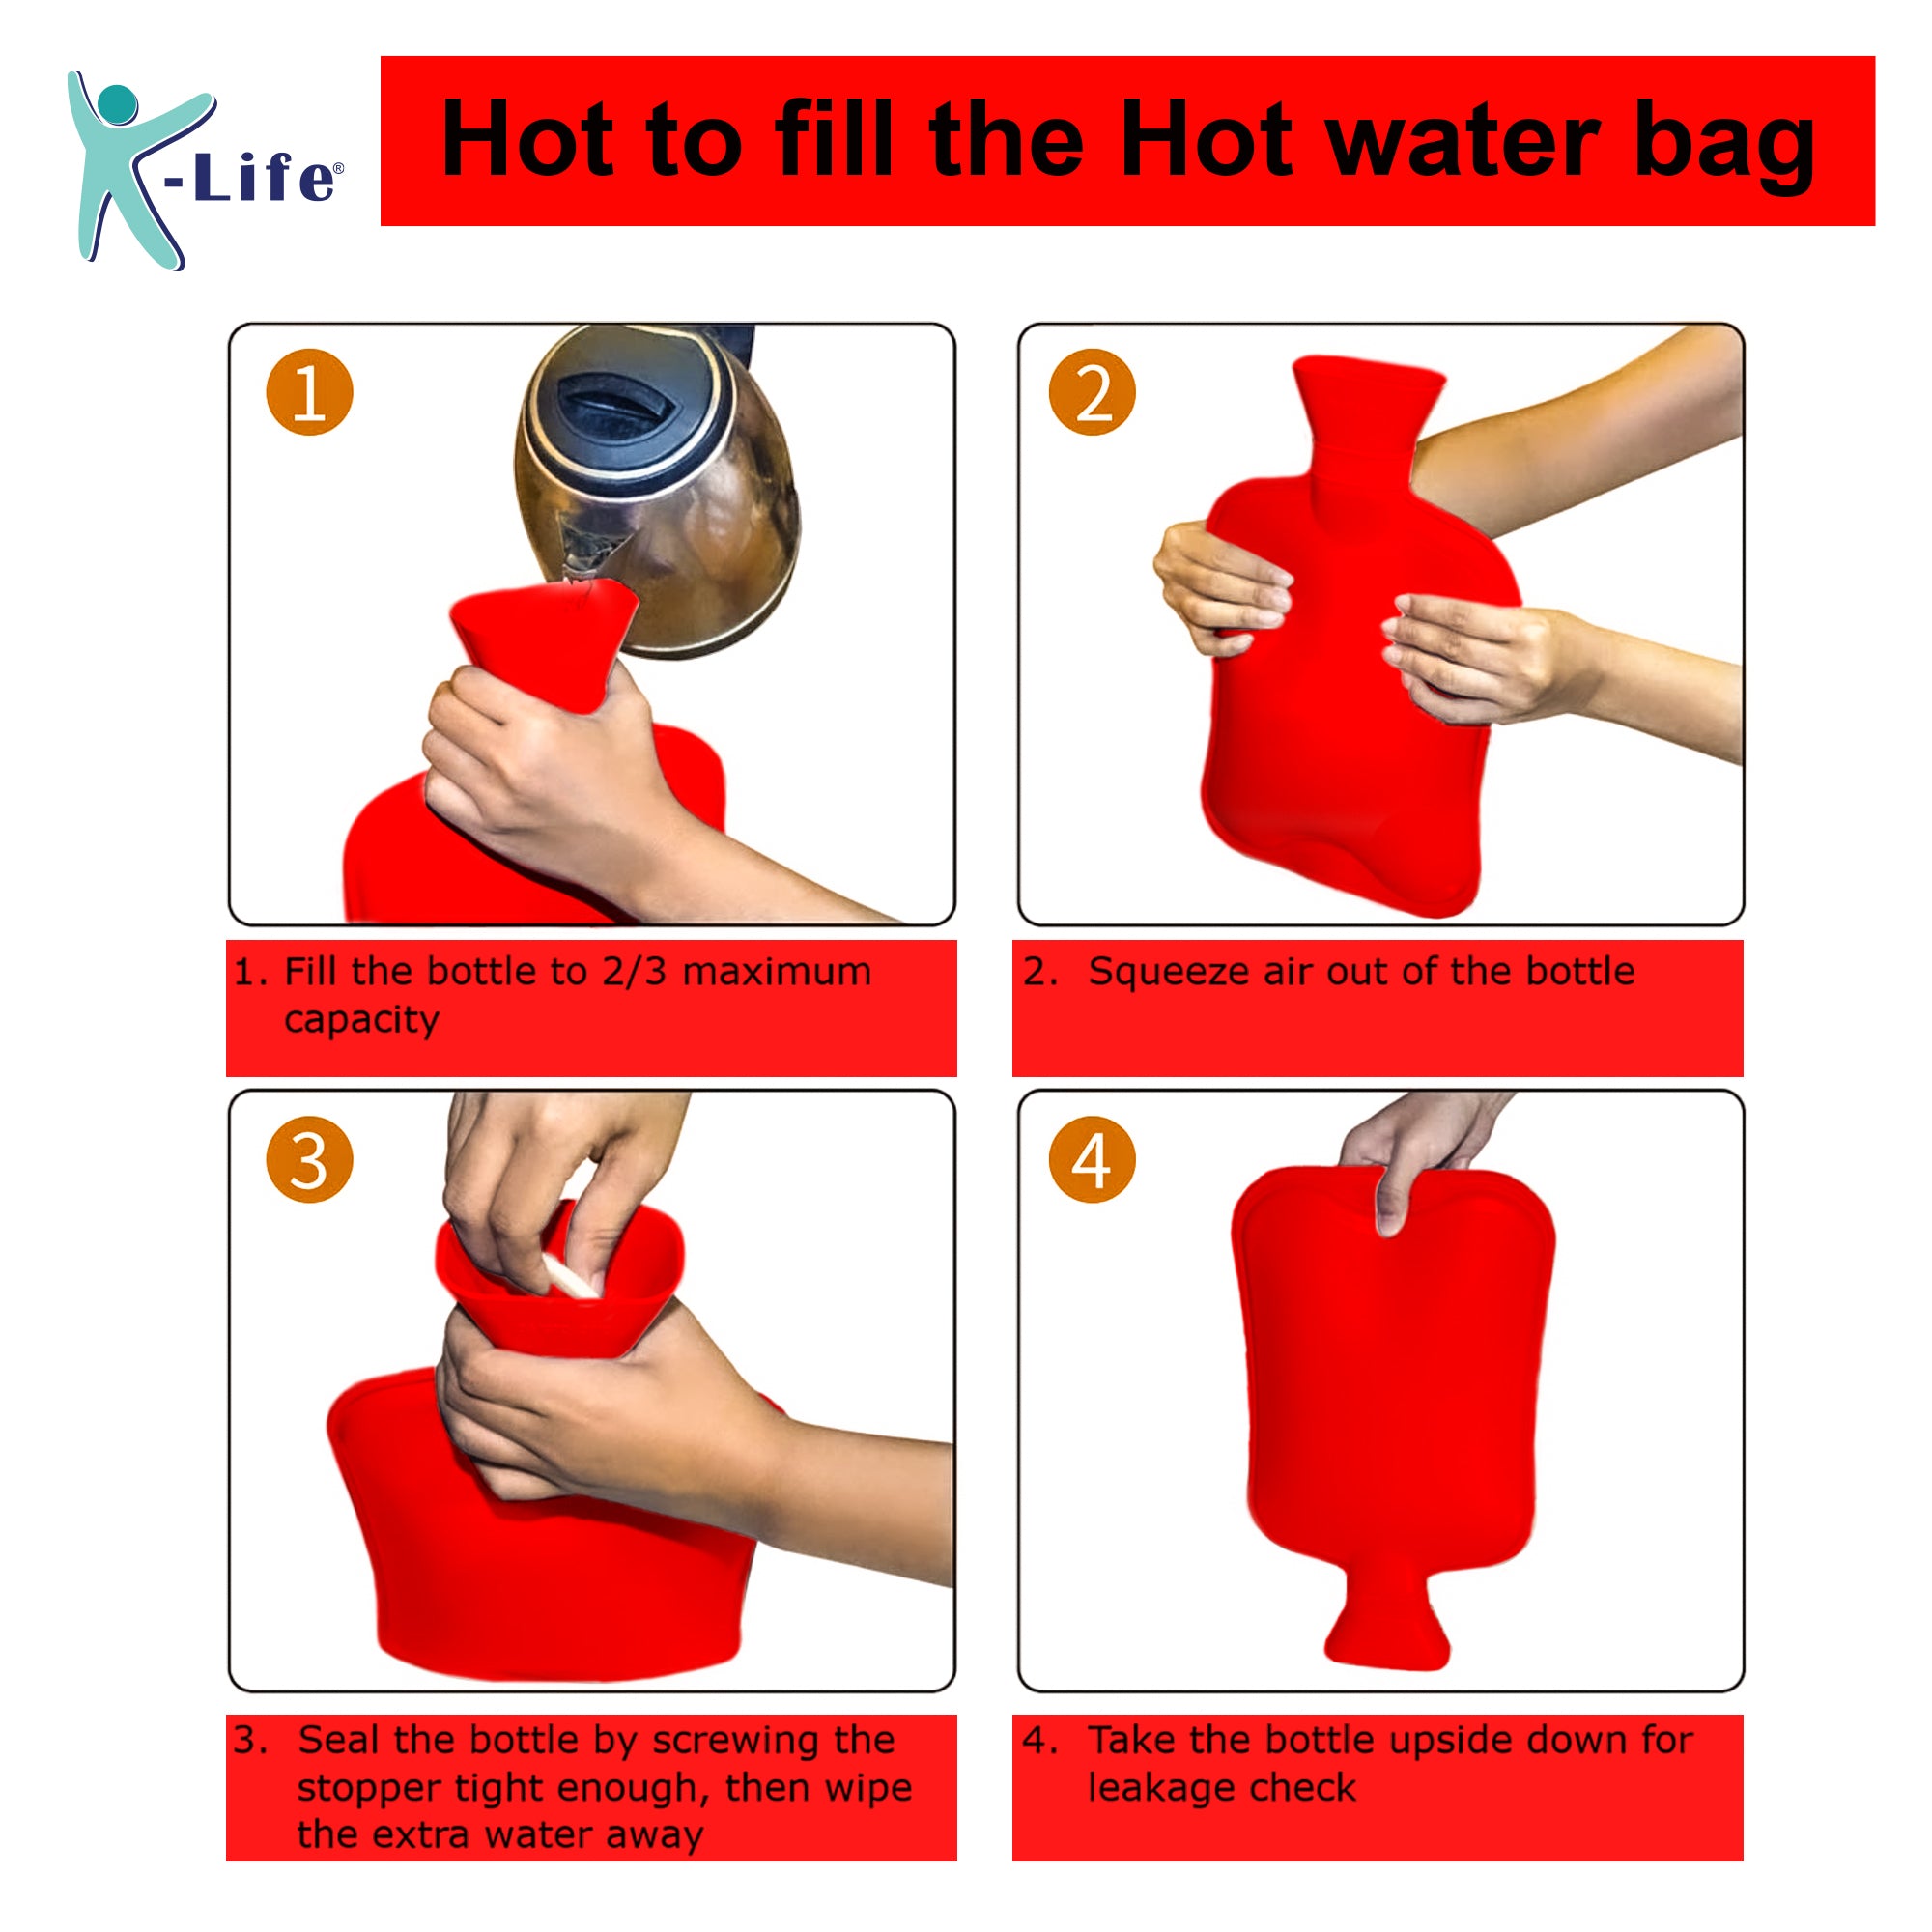 K-life Thick Rubber Non-electrical Hot Water Bag (Red)